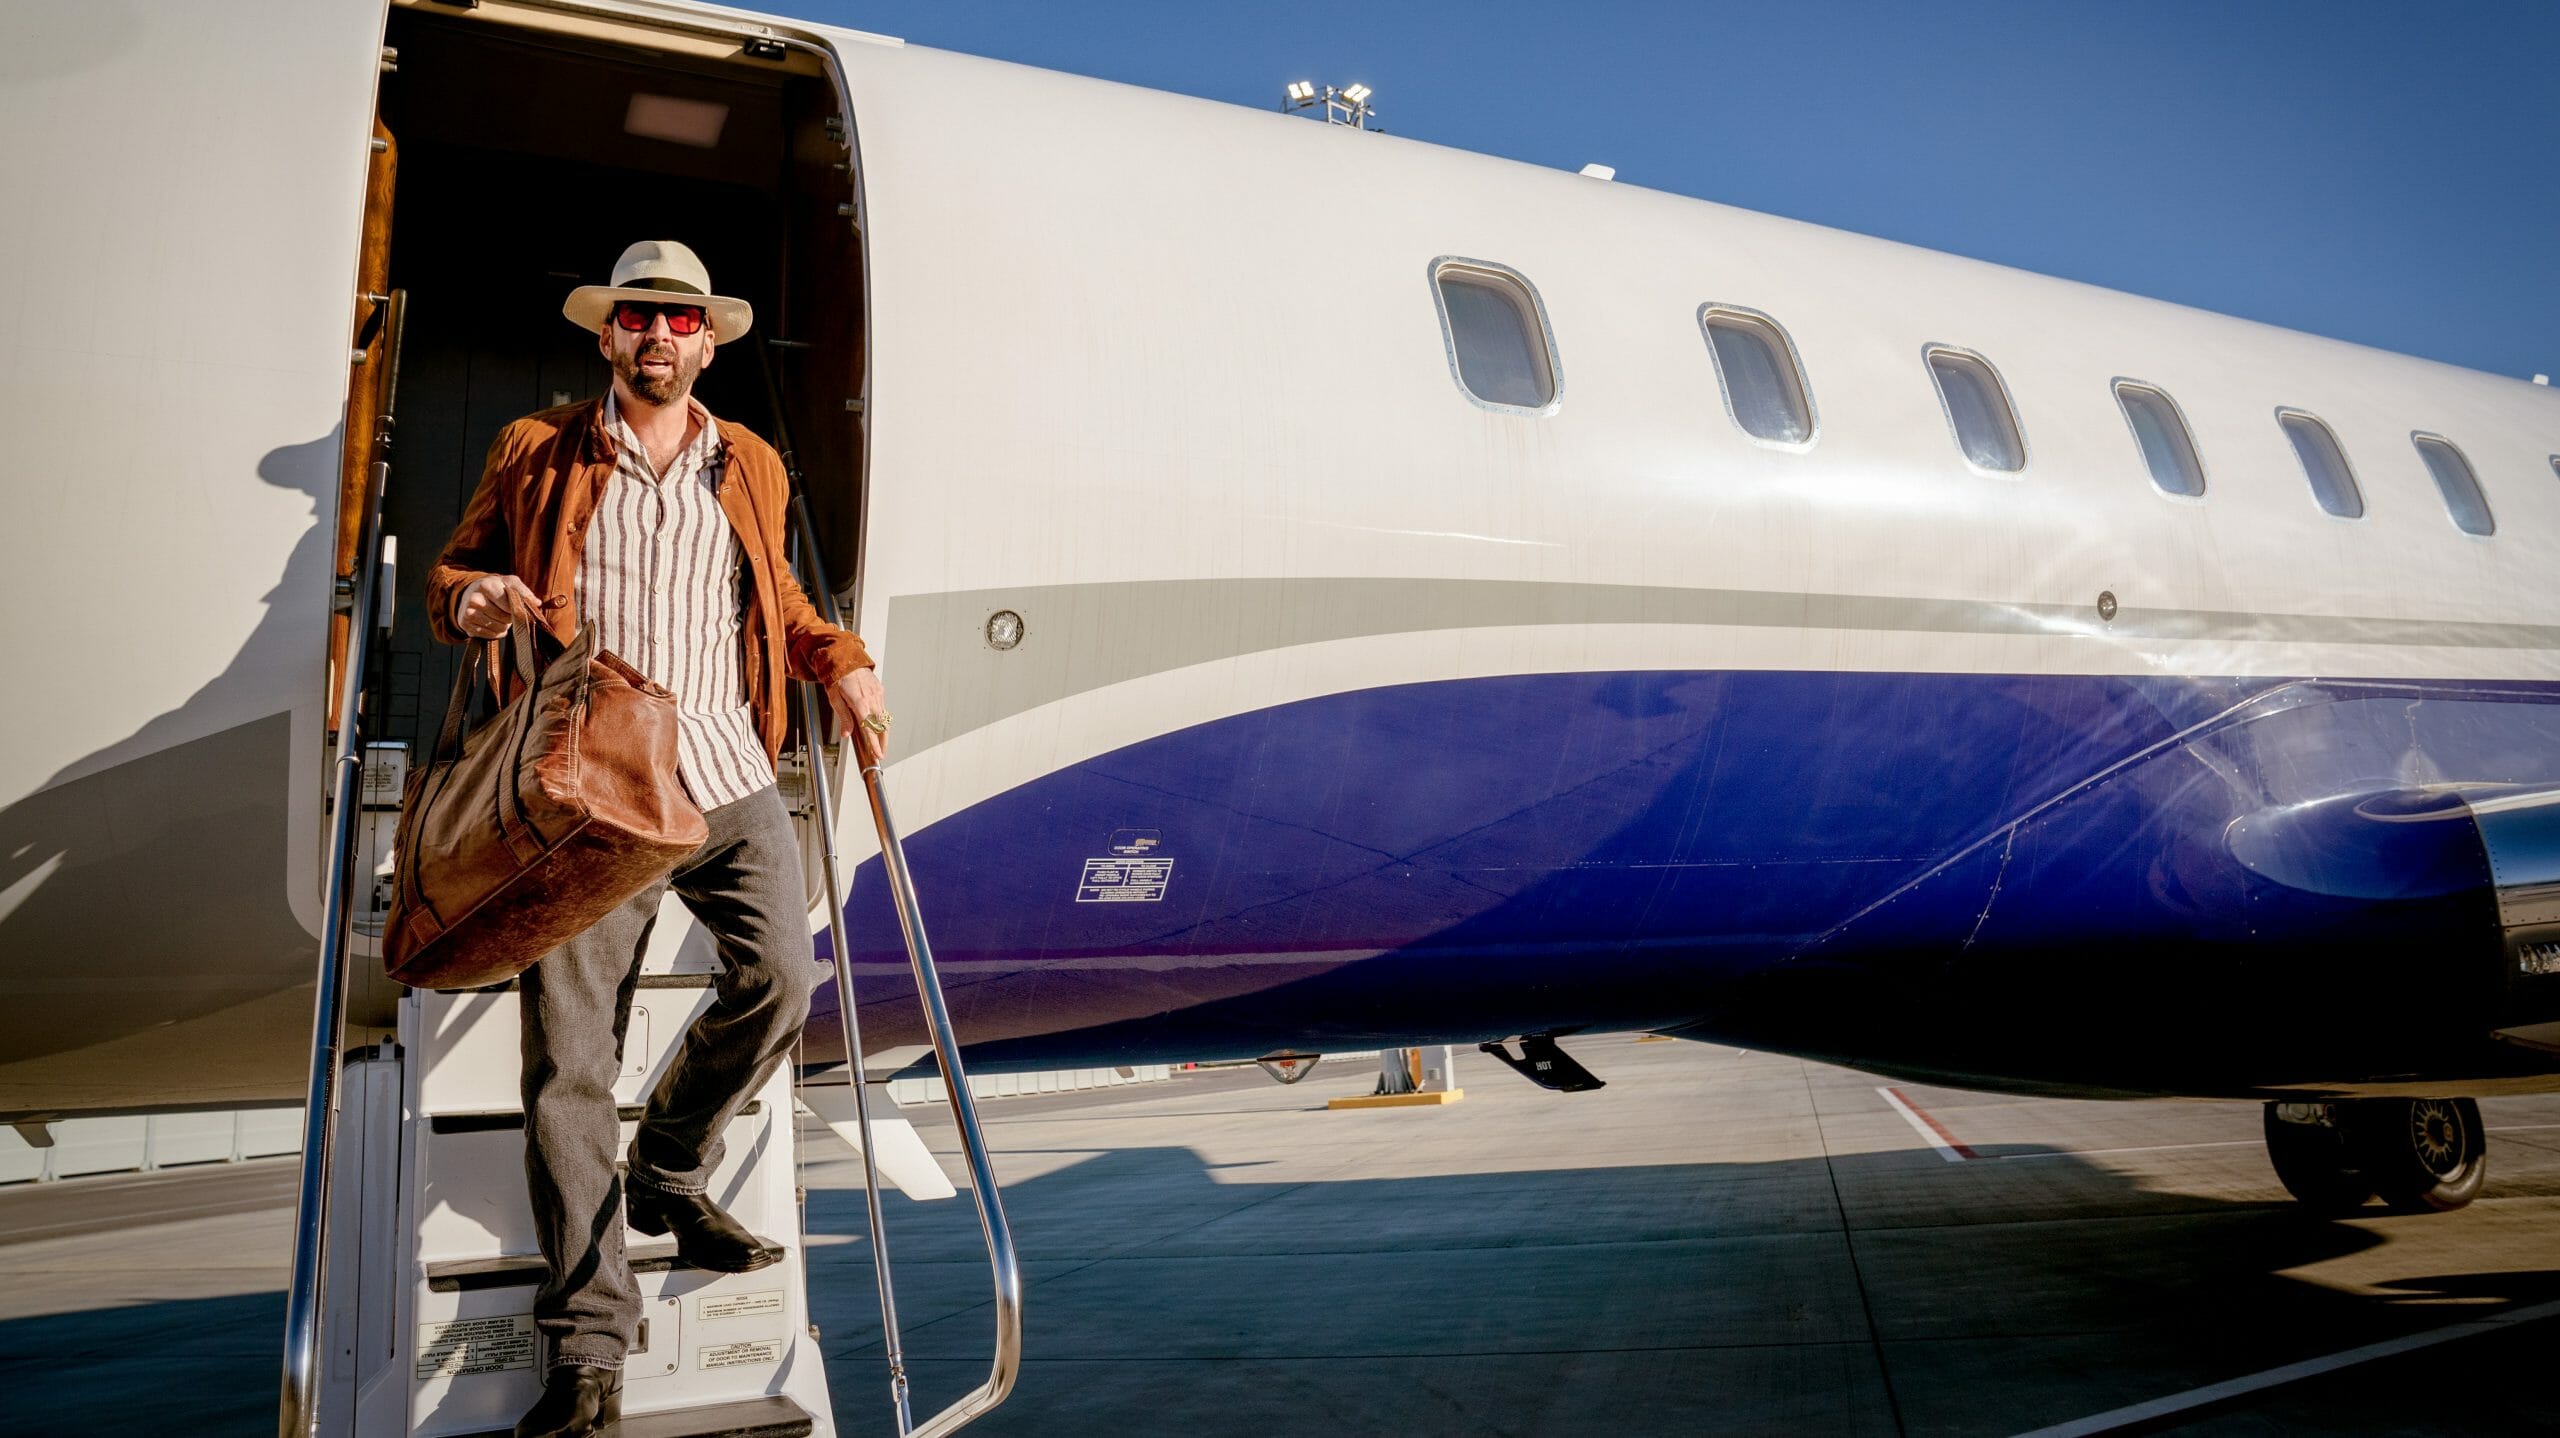 Nicolas Cage exits a private jet wearing red sunglasses and a cowboy hat on his way to his number one fan's birthday party in THE UNBEARABLE WEIGHT OF MASSIVE TALENT.